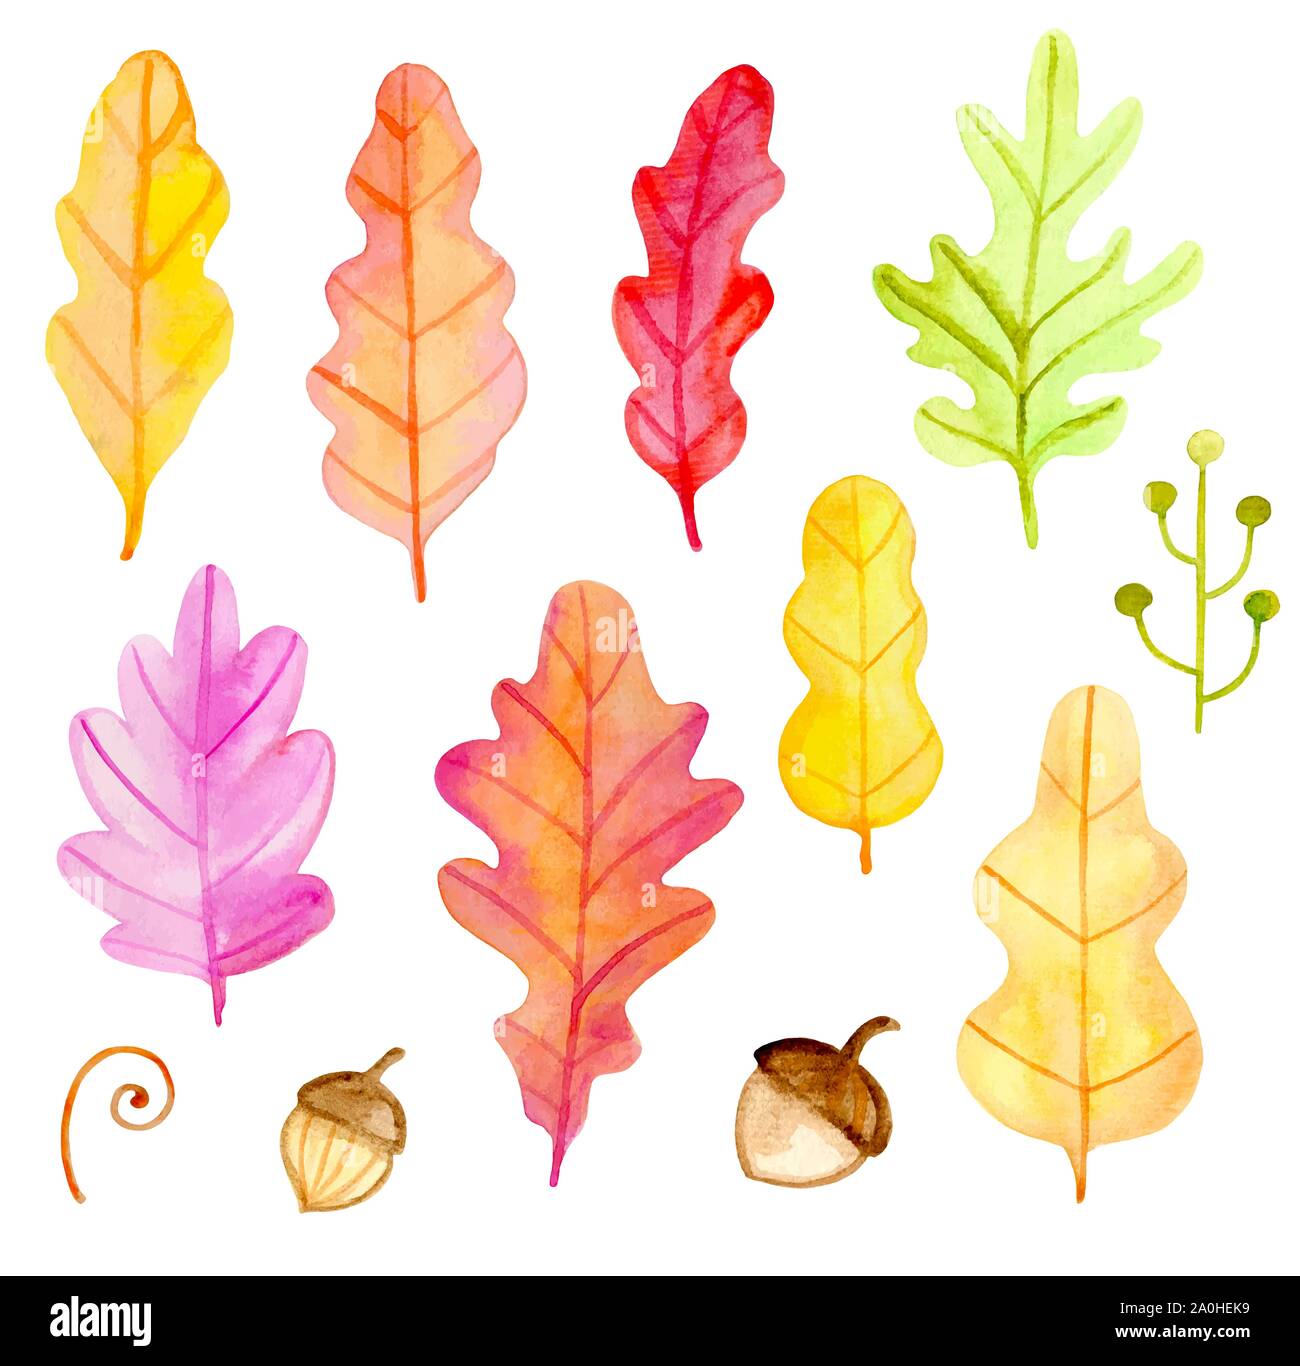 Set of vector watercolor oak leaves and acorns on a white background. Hand drawn botanical autumn design elements. Stock Vector